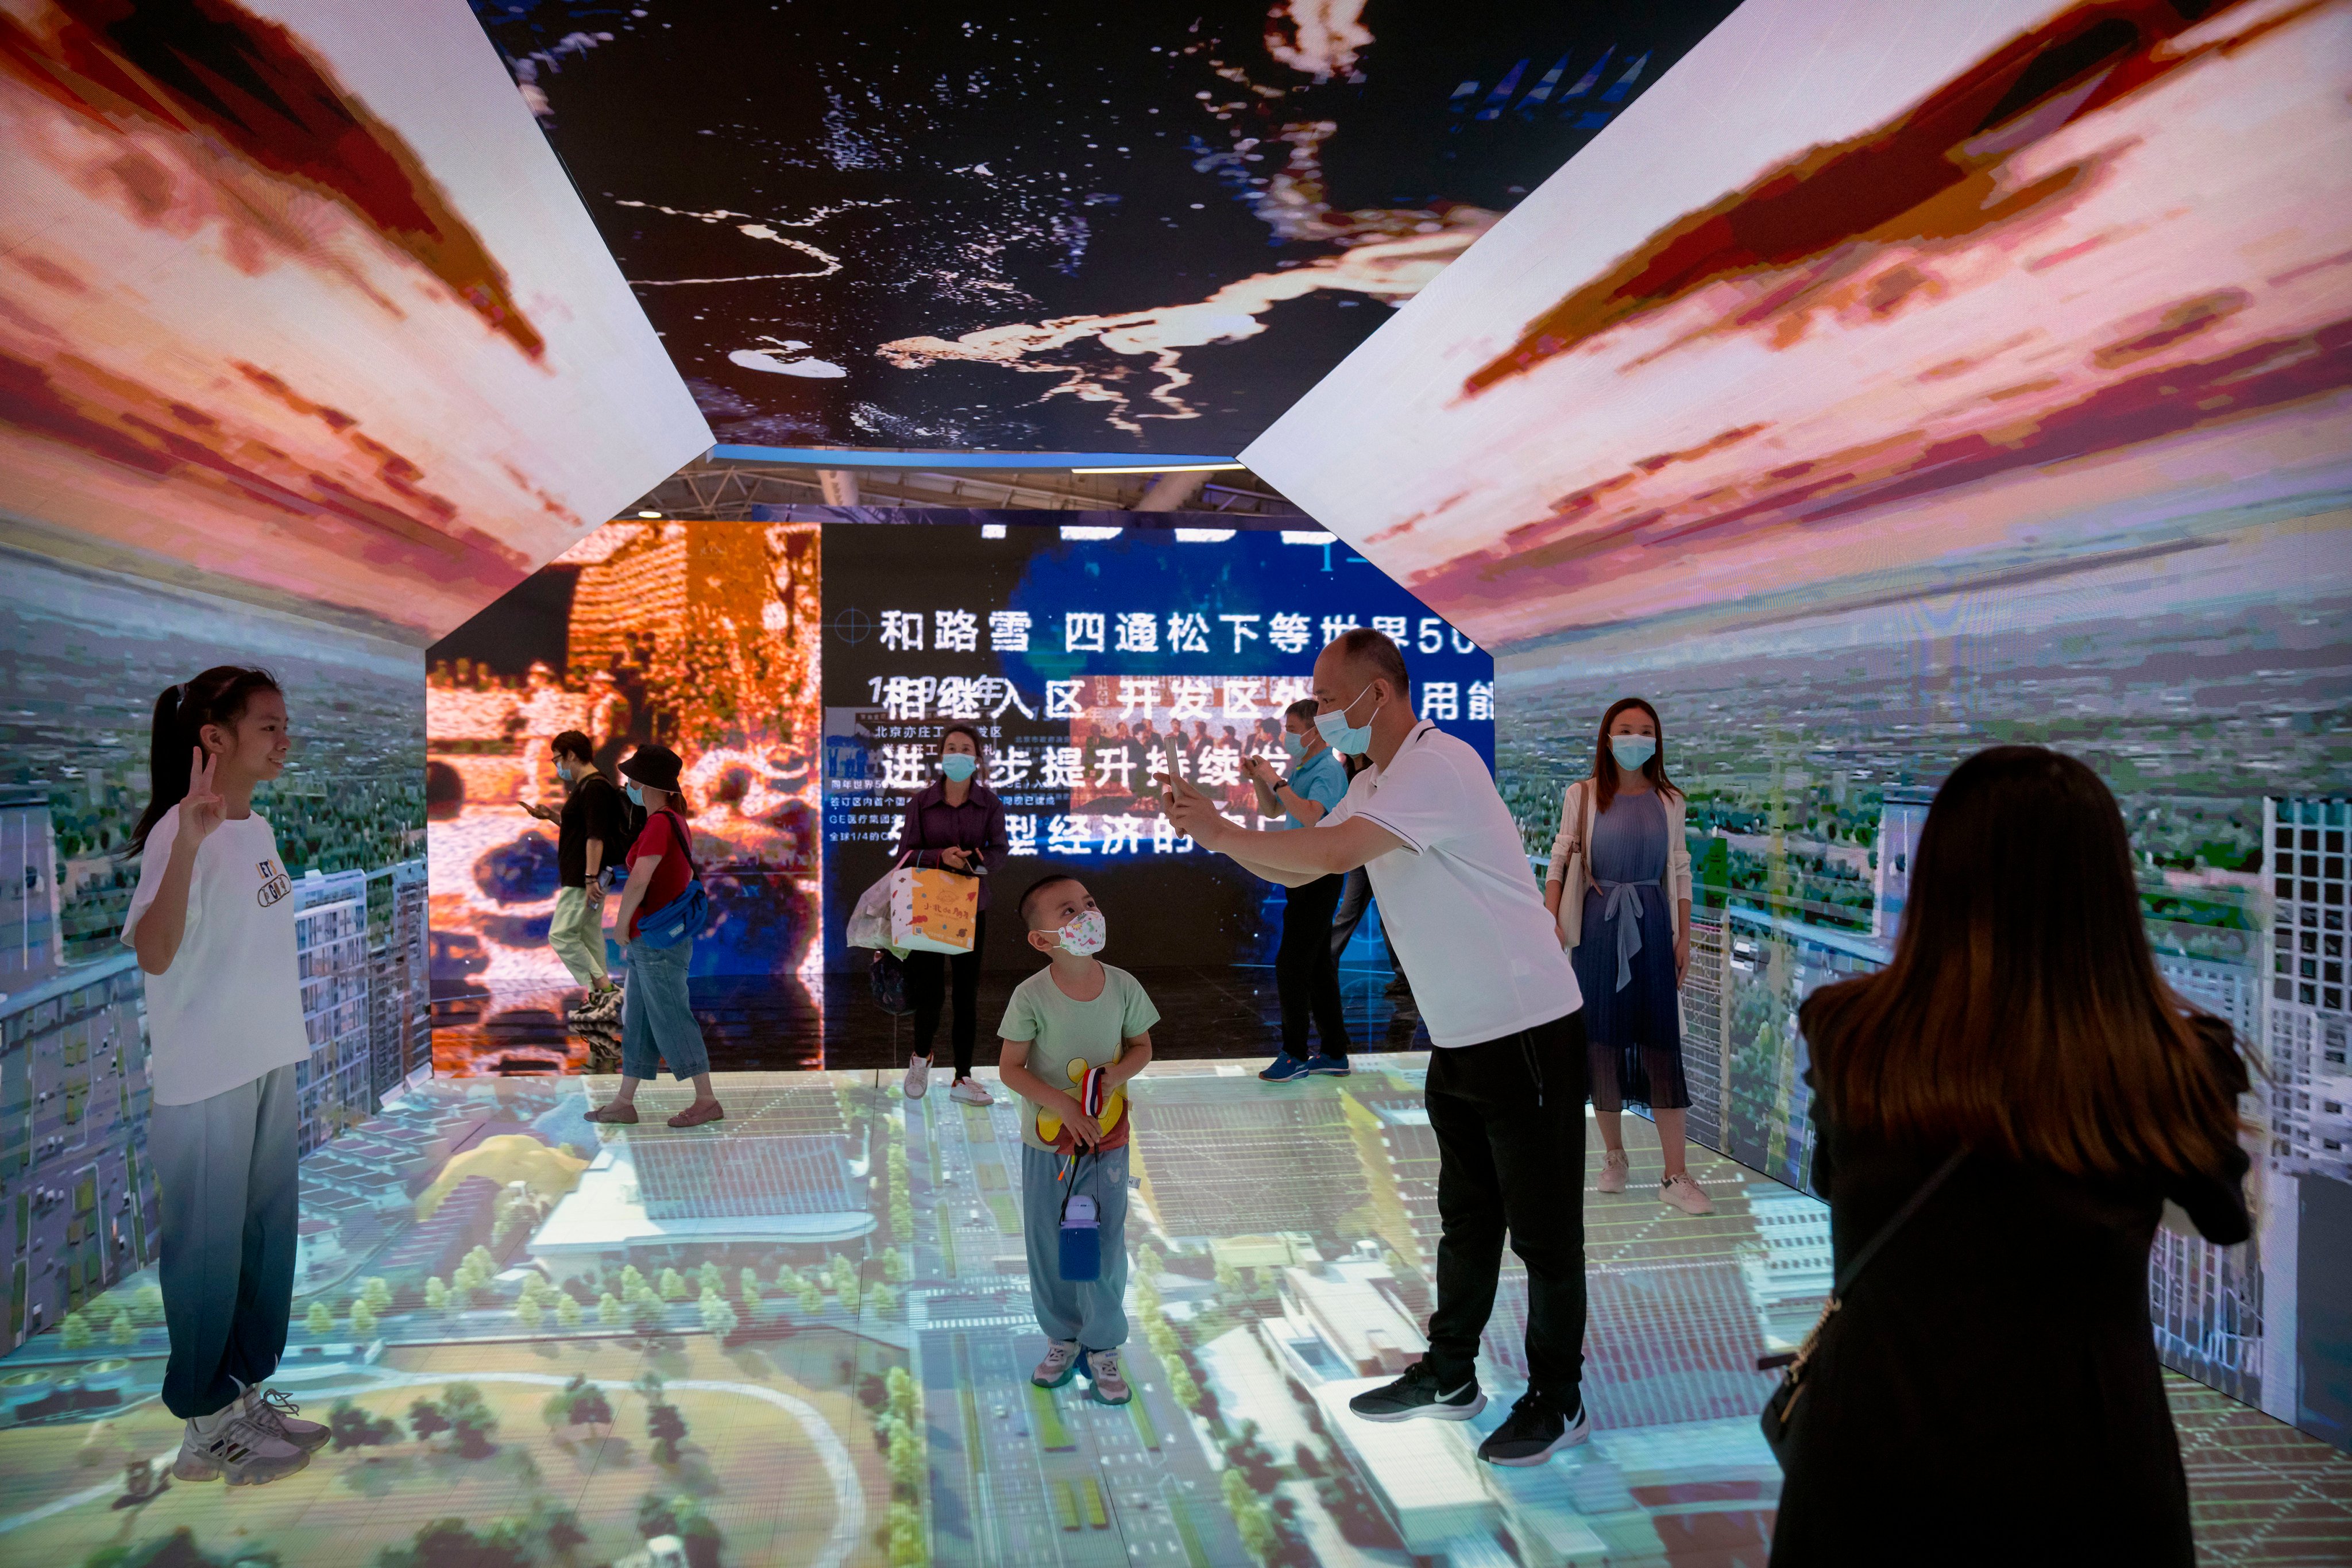 Visitors walk through the Beijing E-town Metaverse Experience display at the China International Fair for Trade in Services on September 3. Photo: AP